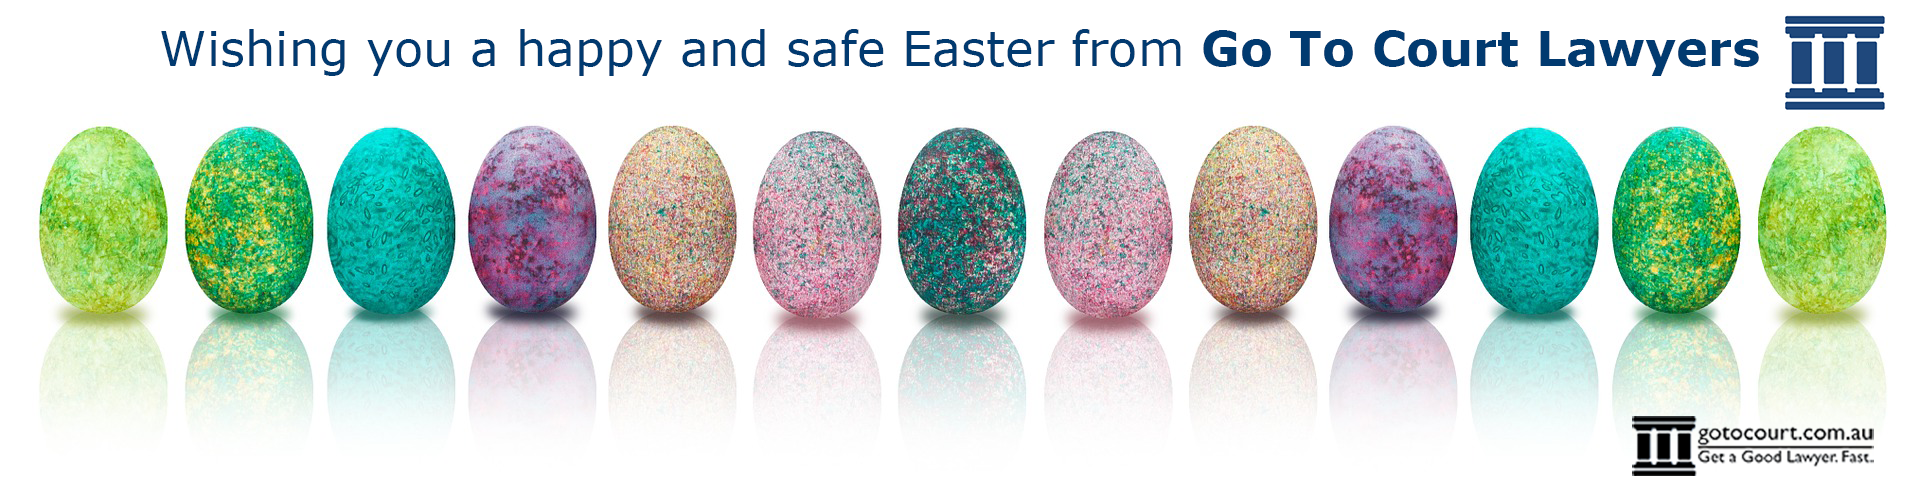 Happy Easter from Go To Court Lawyers